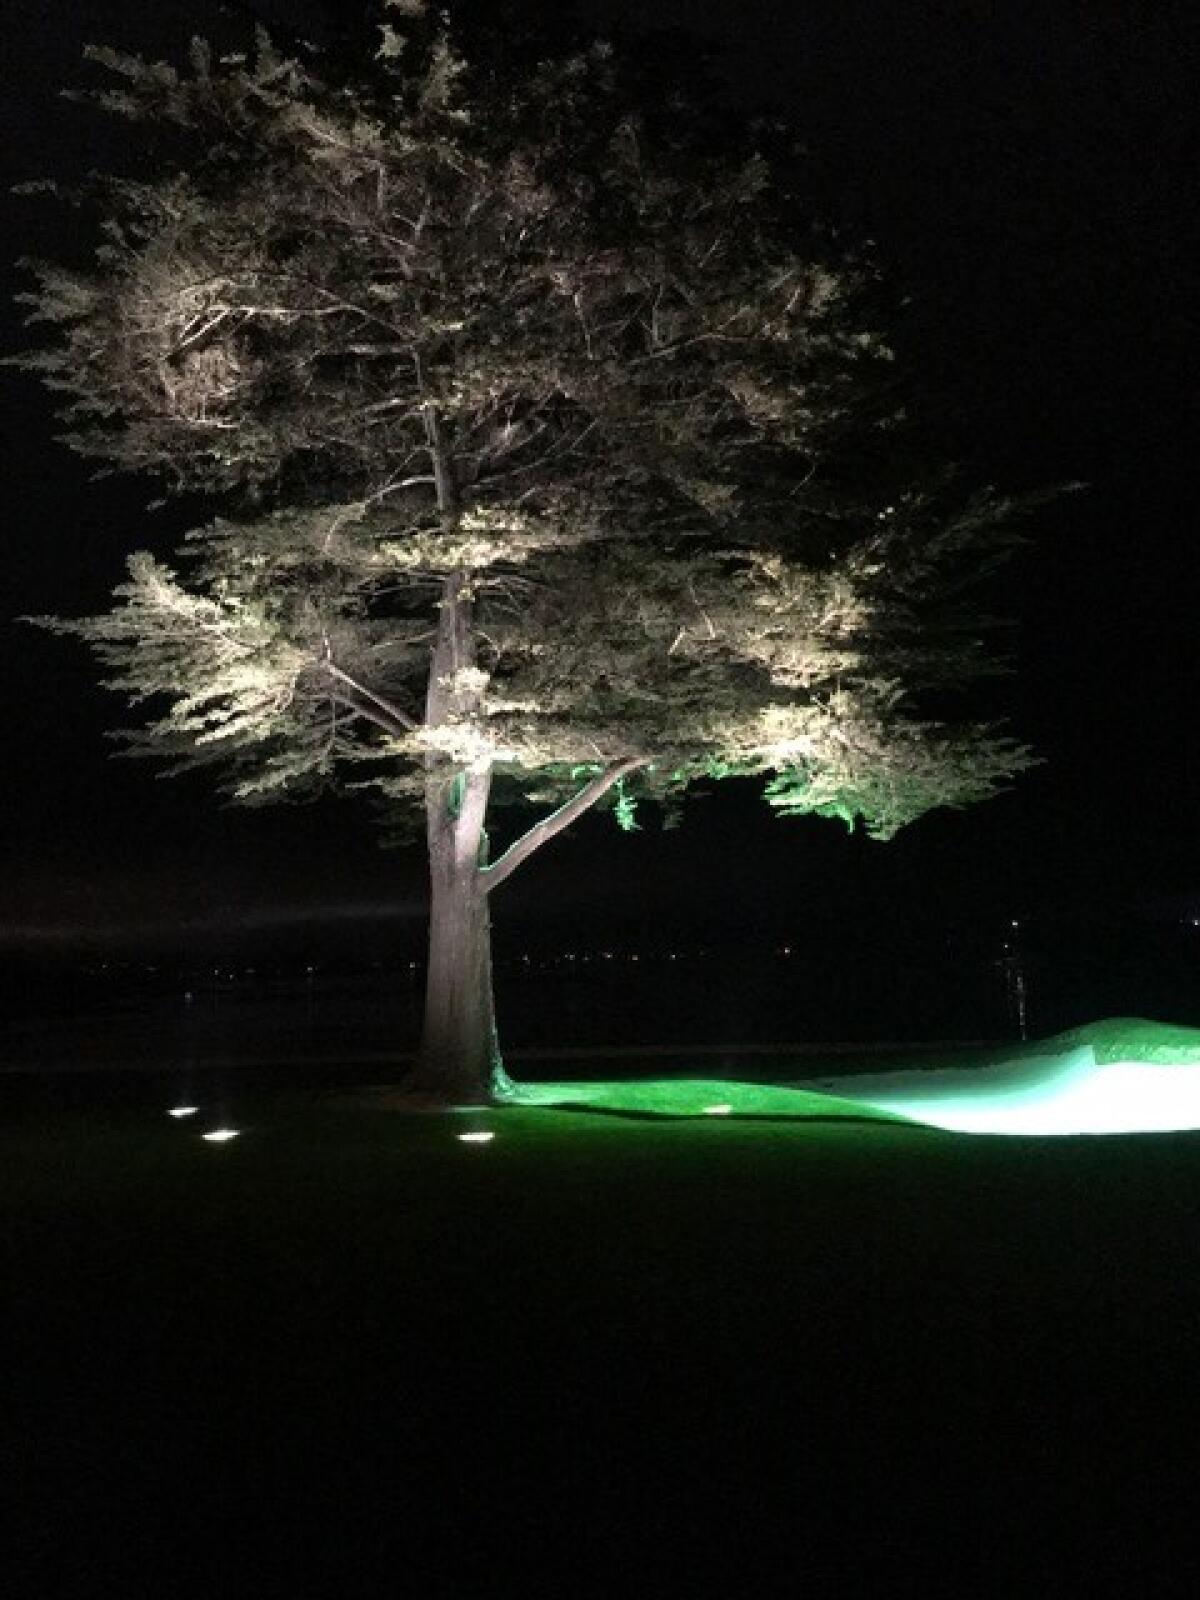 Pebble Beach was the first stop for the brothers, where they sprinkled ashes near the Cypress tree on the 18th fairway.